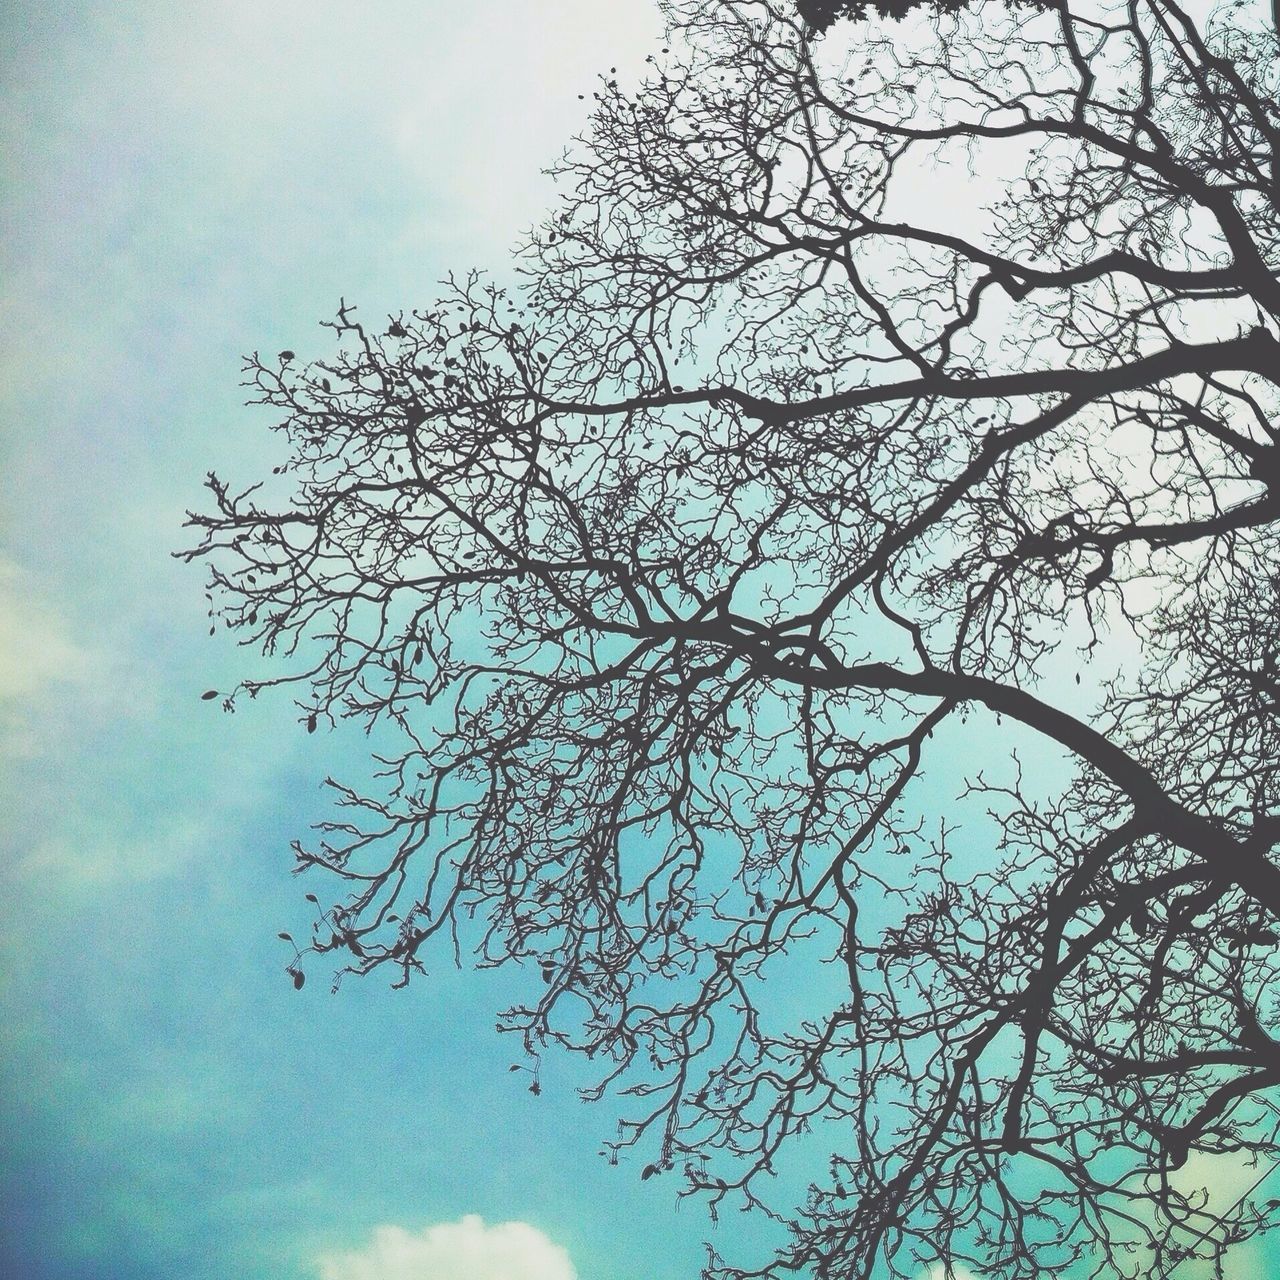 low angle view, sky, tree, branch, nature, cloud - sky, beauty in nature, growth, tranquility, bare tree, cloudy, cloud, scenics, day, outdoors, no people, high section, tranquil scene, treetop, blue